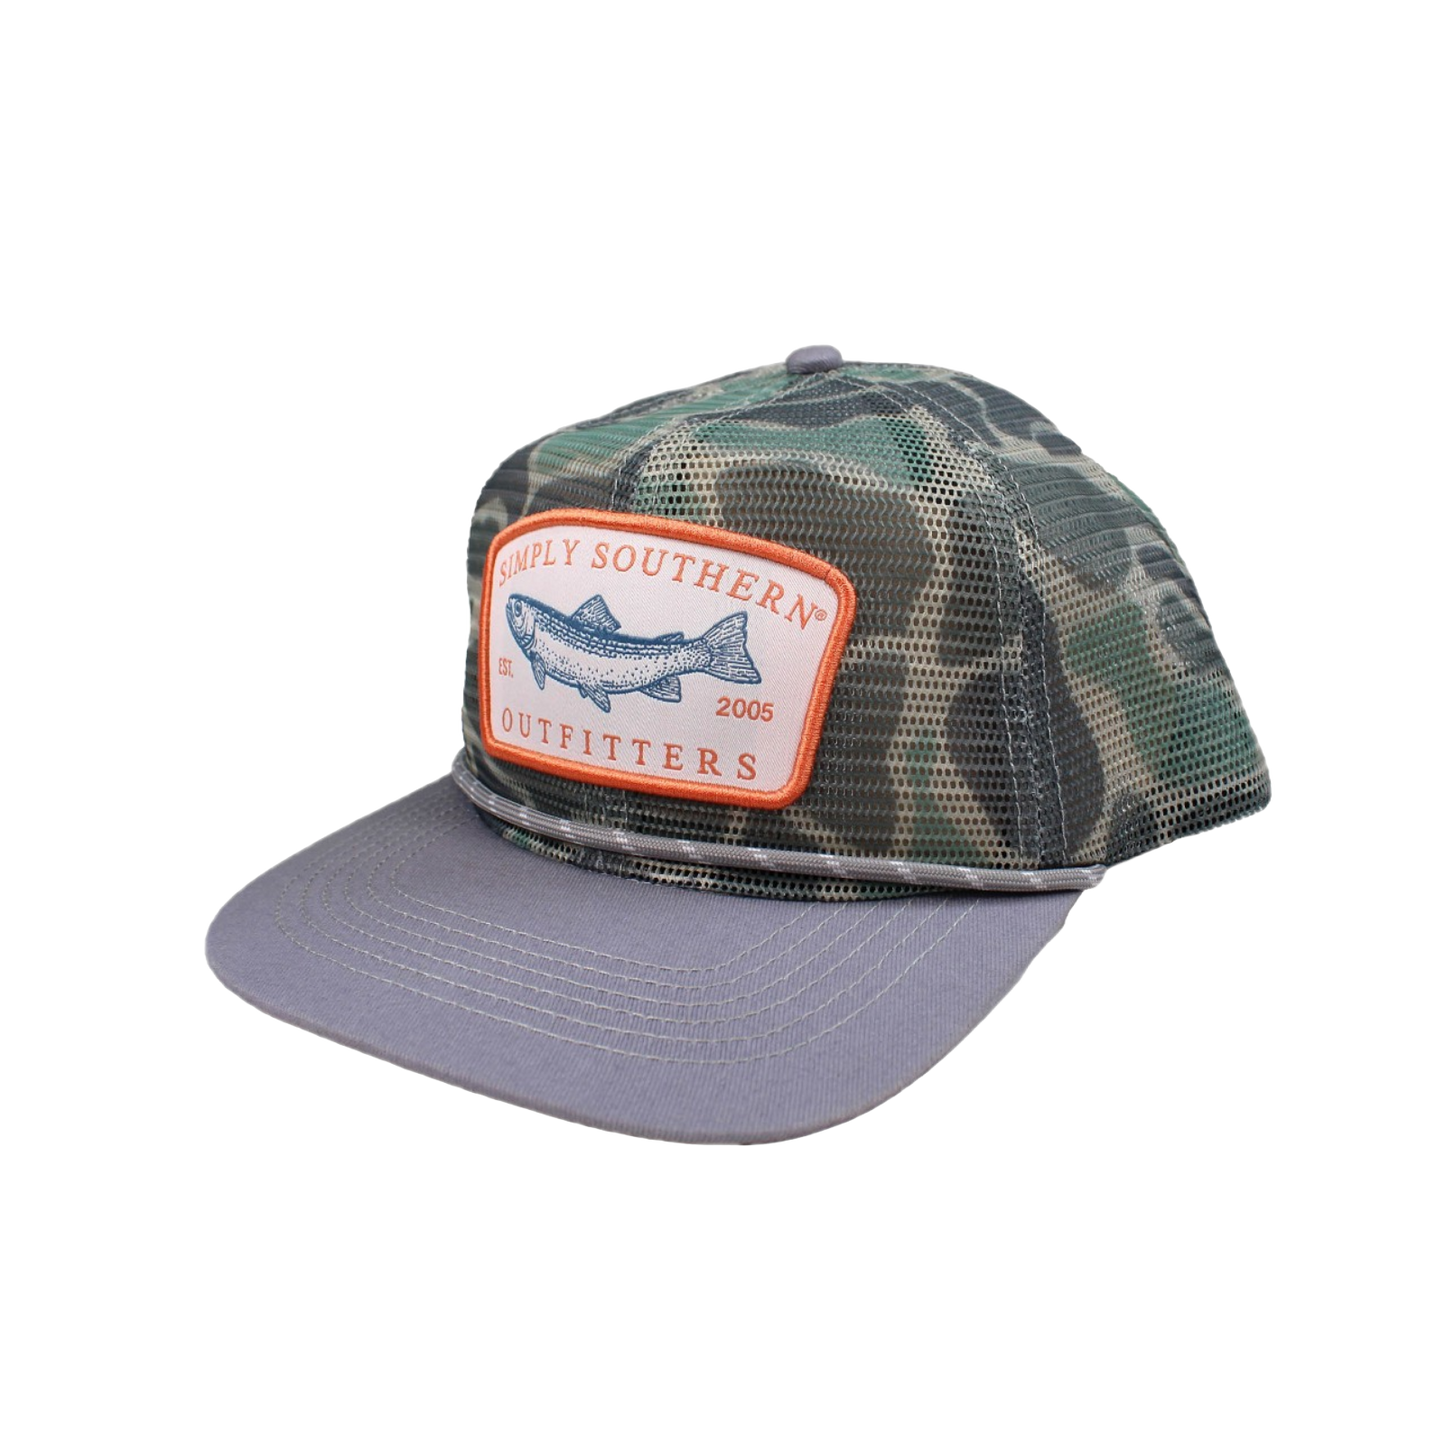 Simply Southern Men's Fish Camo Snapback Hat 0124-MN-HAT-CURVED-FISH – Wild  West Boot Store